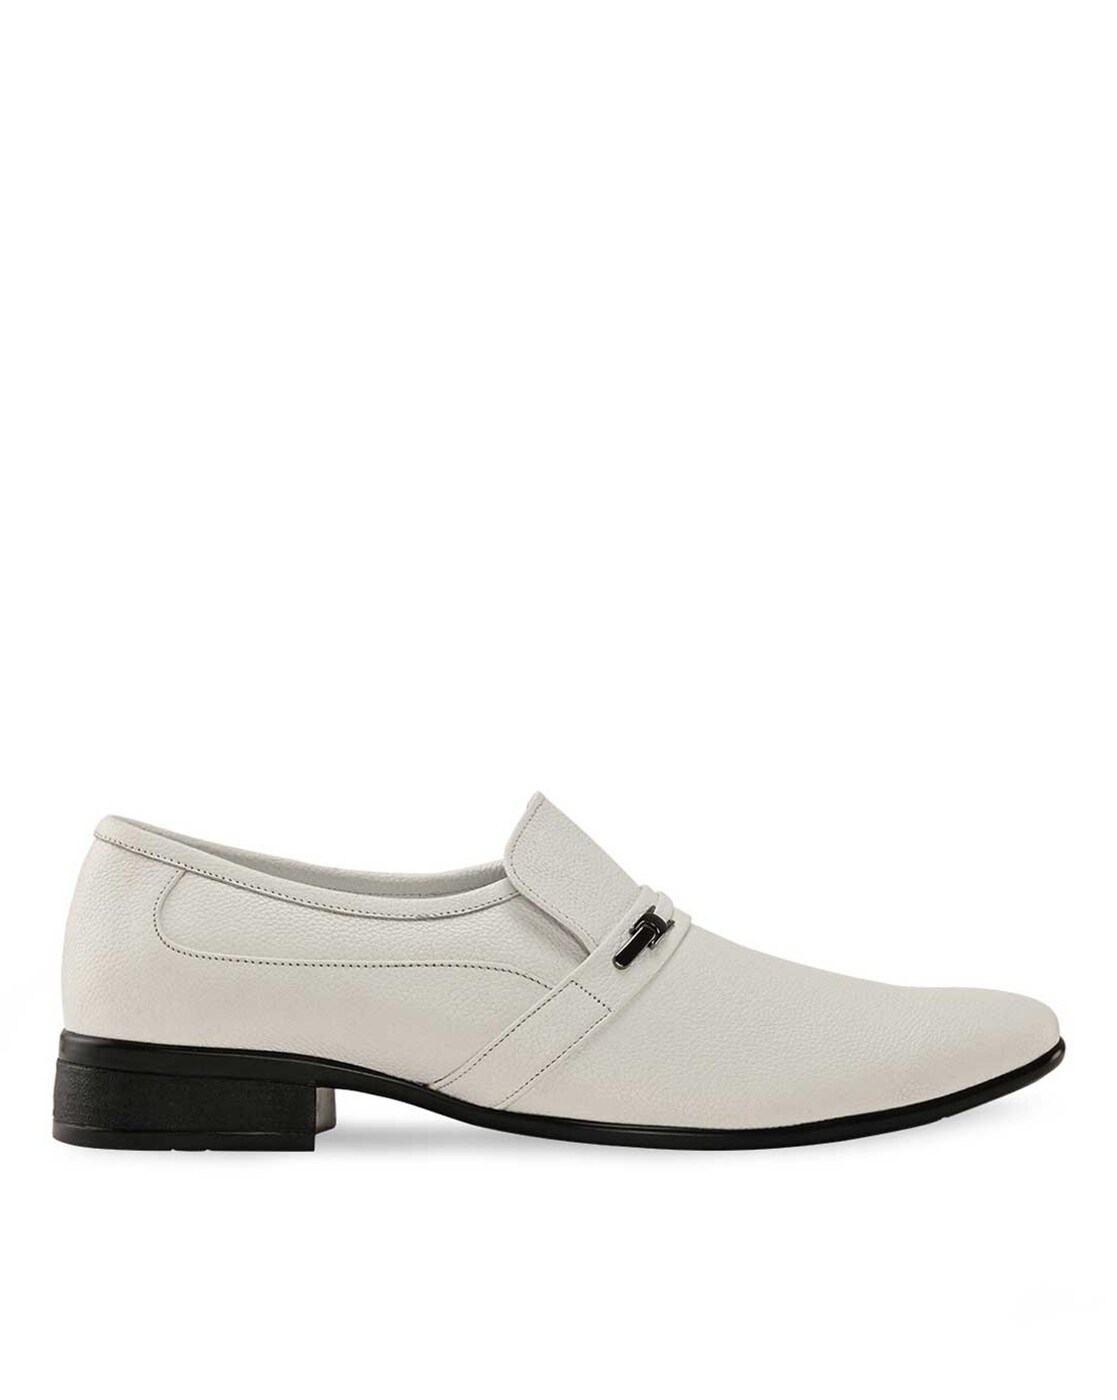 Florsheim 870797 Genuine Leather Formal Slip-ons Men's Shoe (Size 8, White)  in Noida at best price by Fairdeal Shoes And Accessories (Dlf Mall Of  India) - Justdial